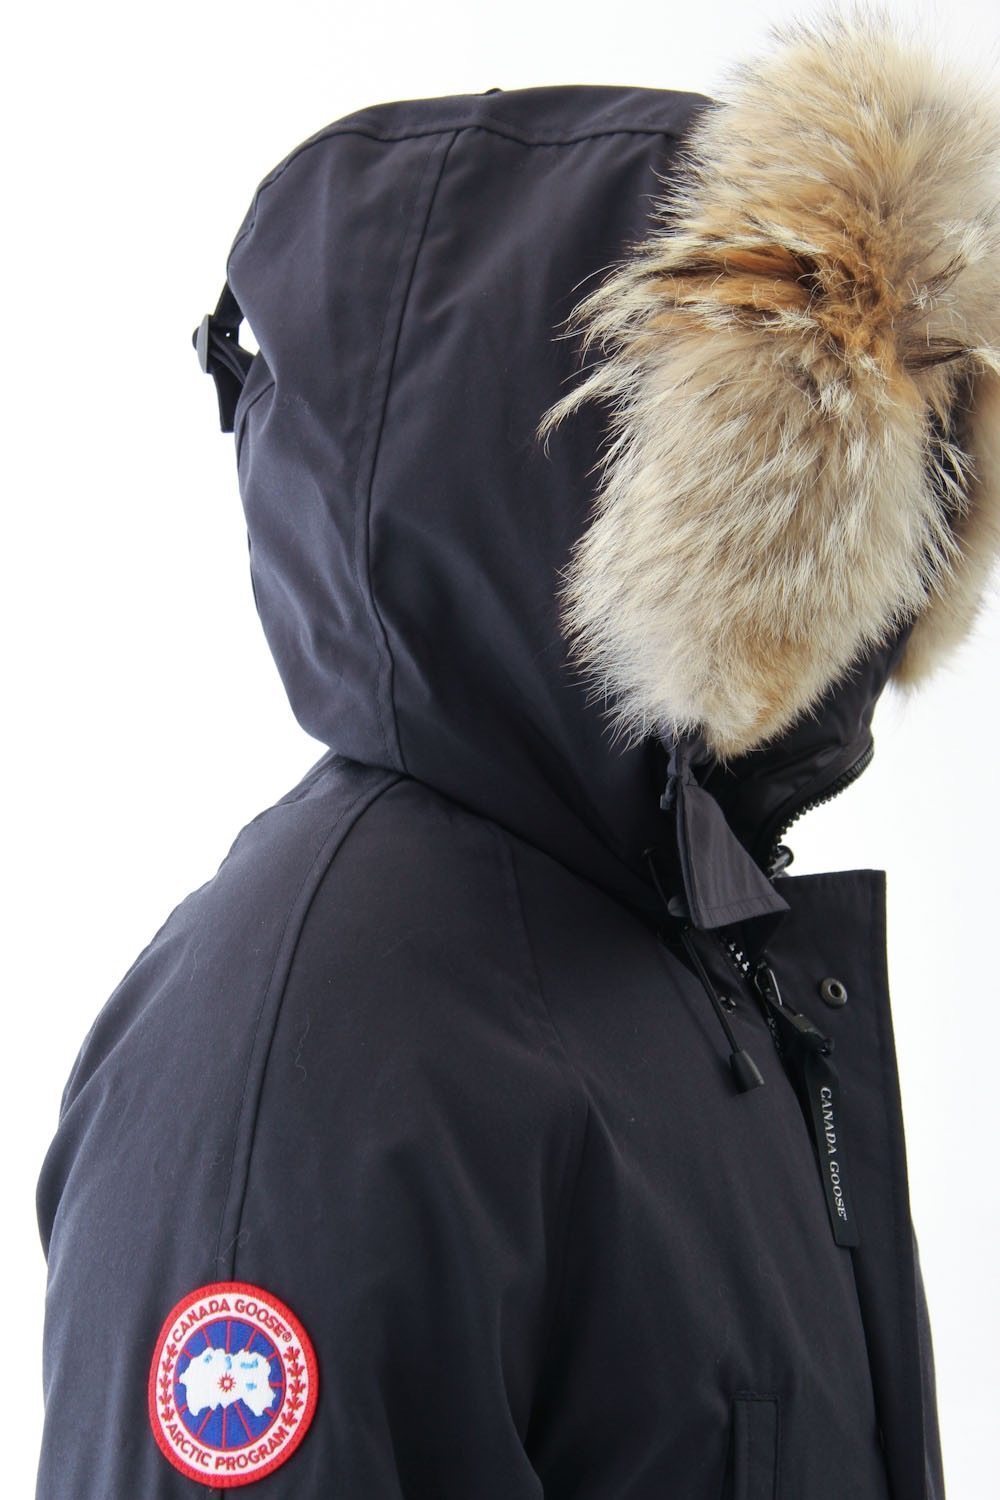 Canada Goose langford parka online shop - My Thoughts on Fur and the Irresponsible Plague of Canada Goose ...